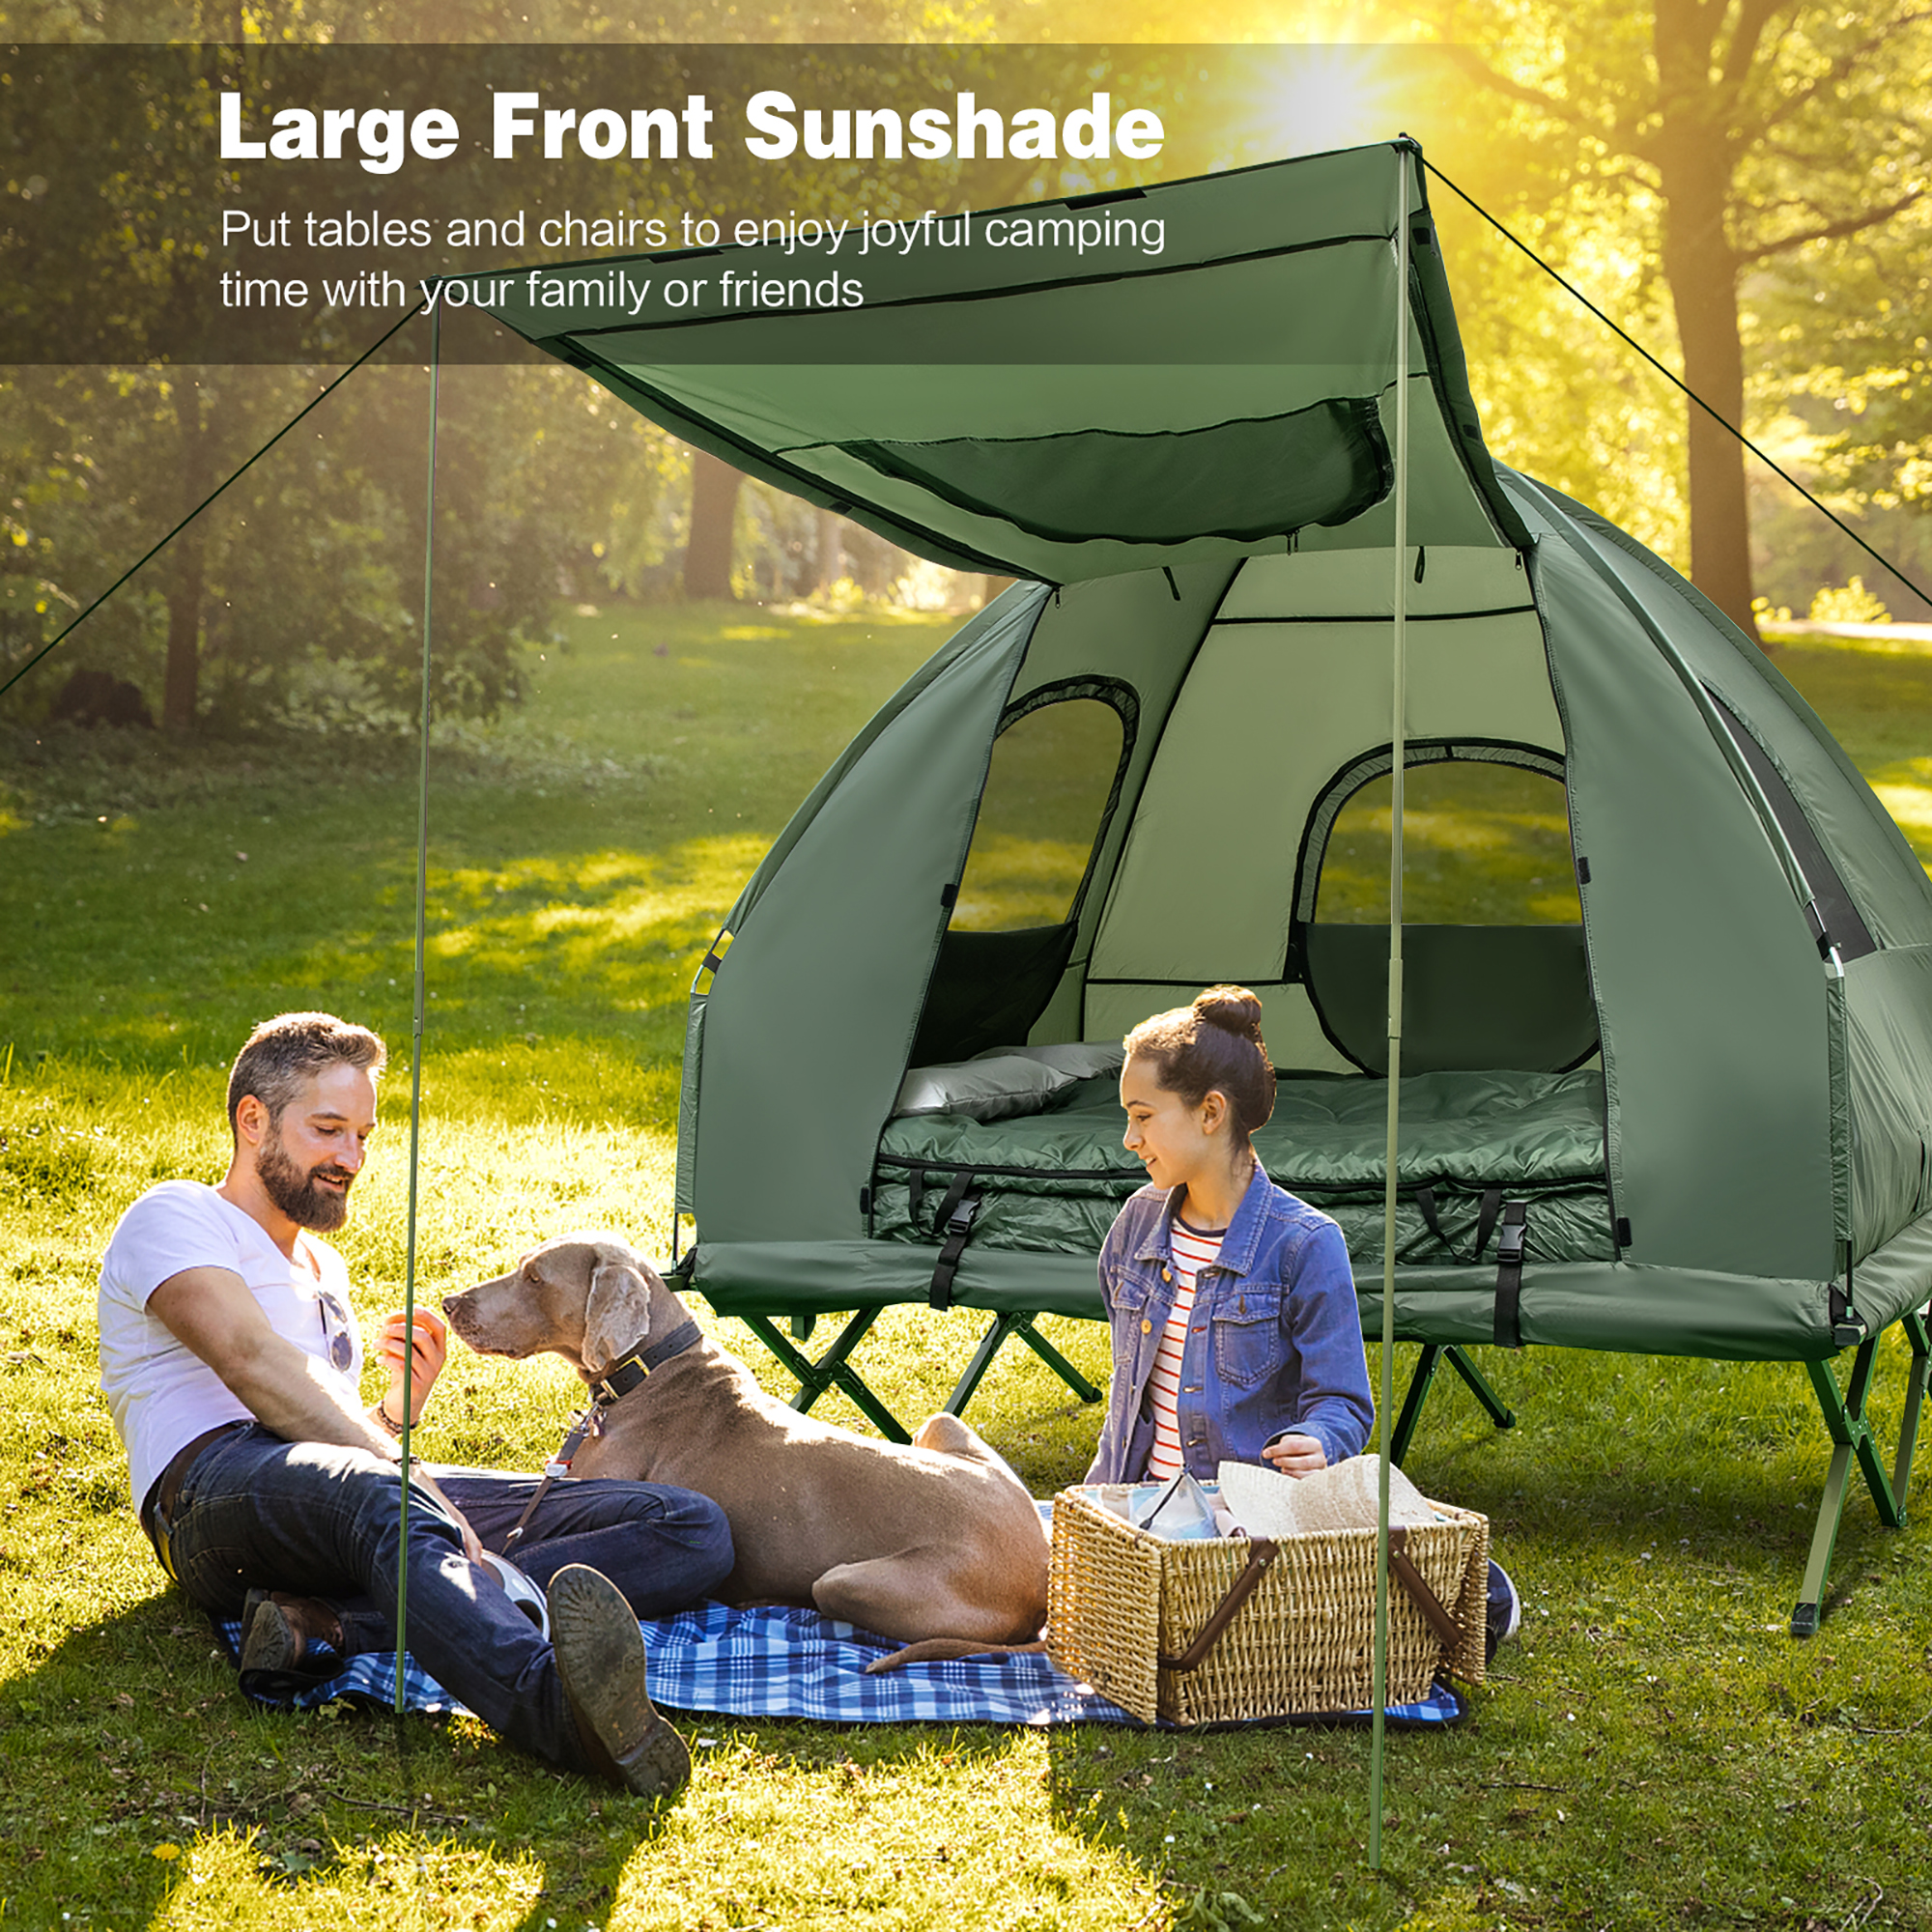 Gymax 2-Person Compact Portable Pop-Up Tent/Camping Cot w/ Air Mattress & Sleeping Bag - image 3 of 10